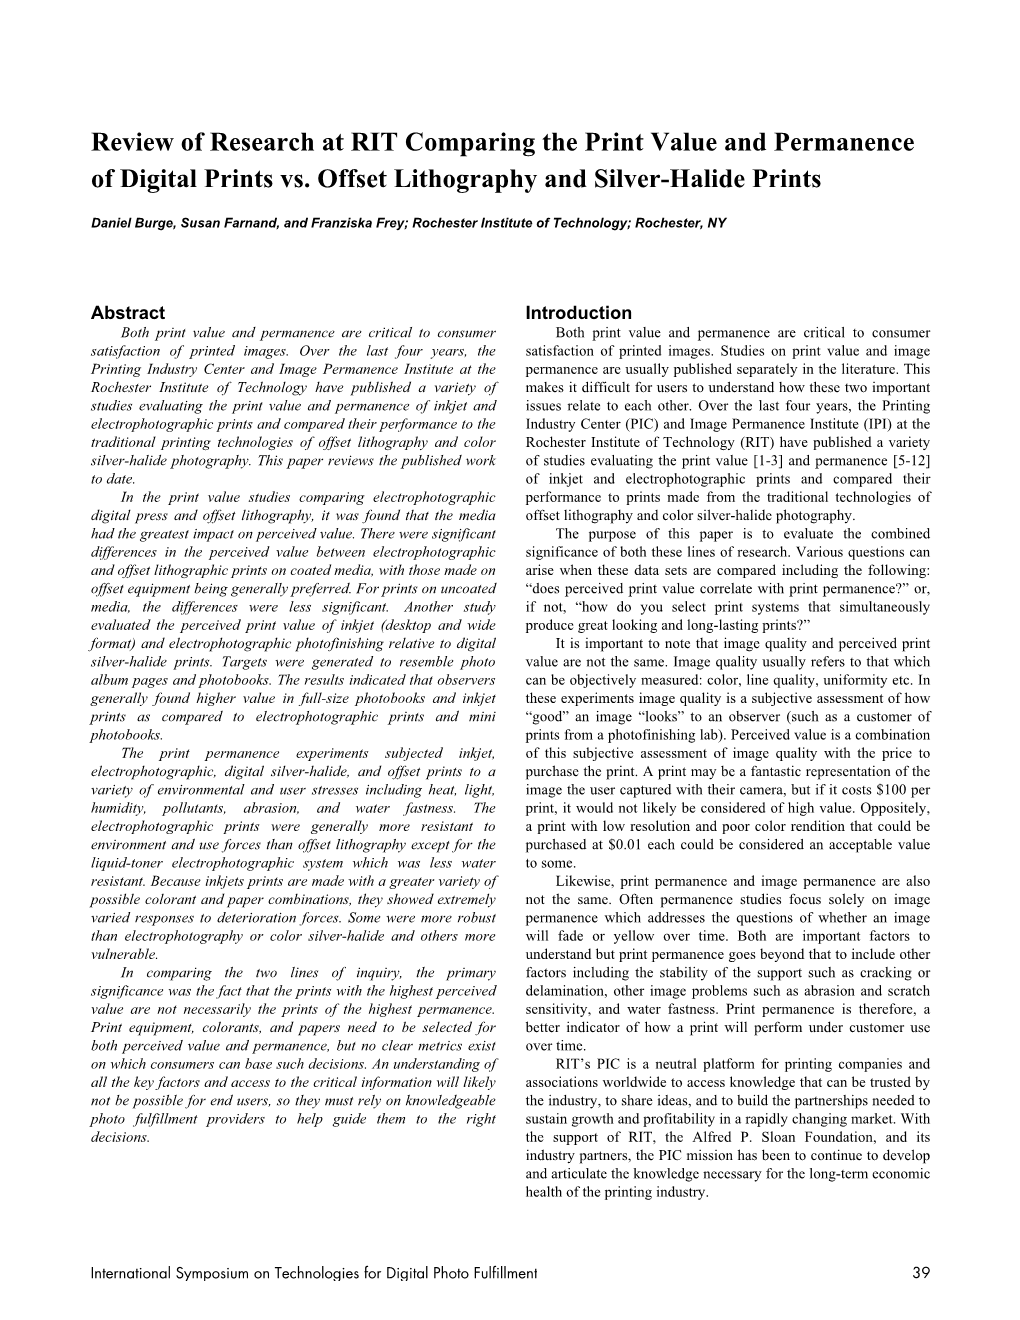 Review of Research at RIT Comparing the Print Value and Permanence of Digital Prints Vs